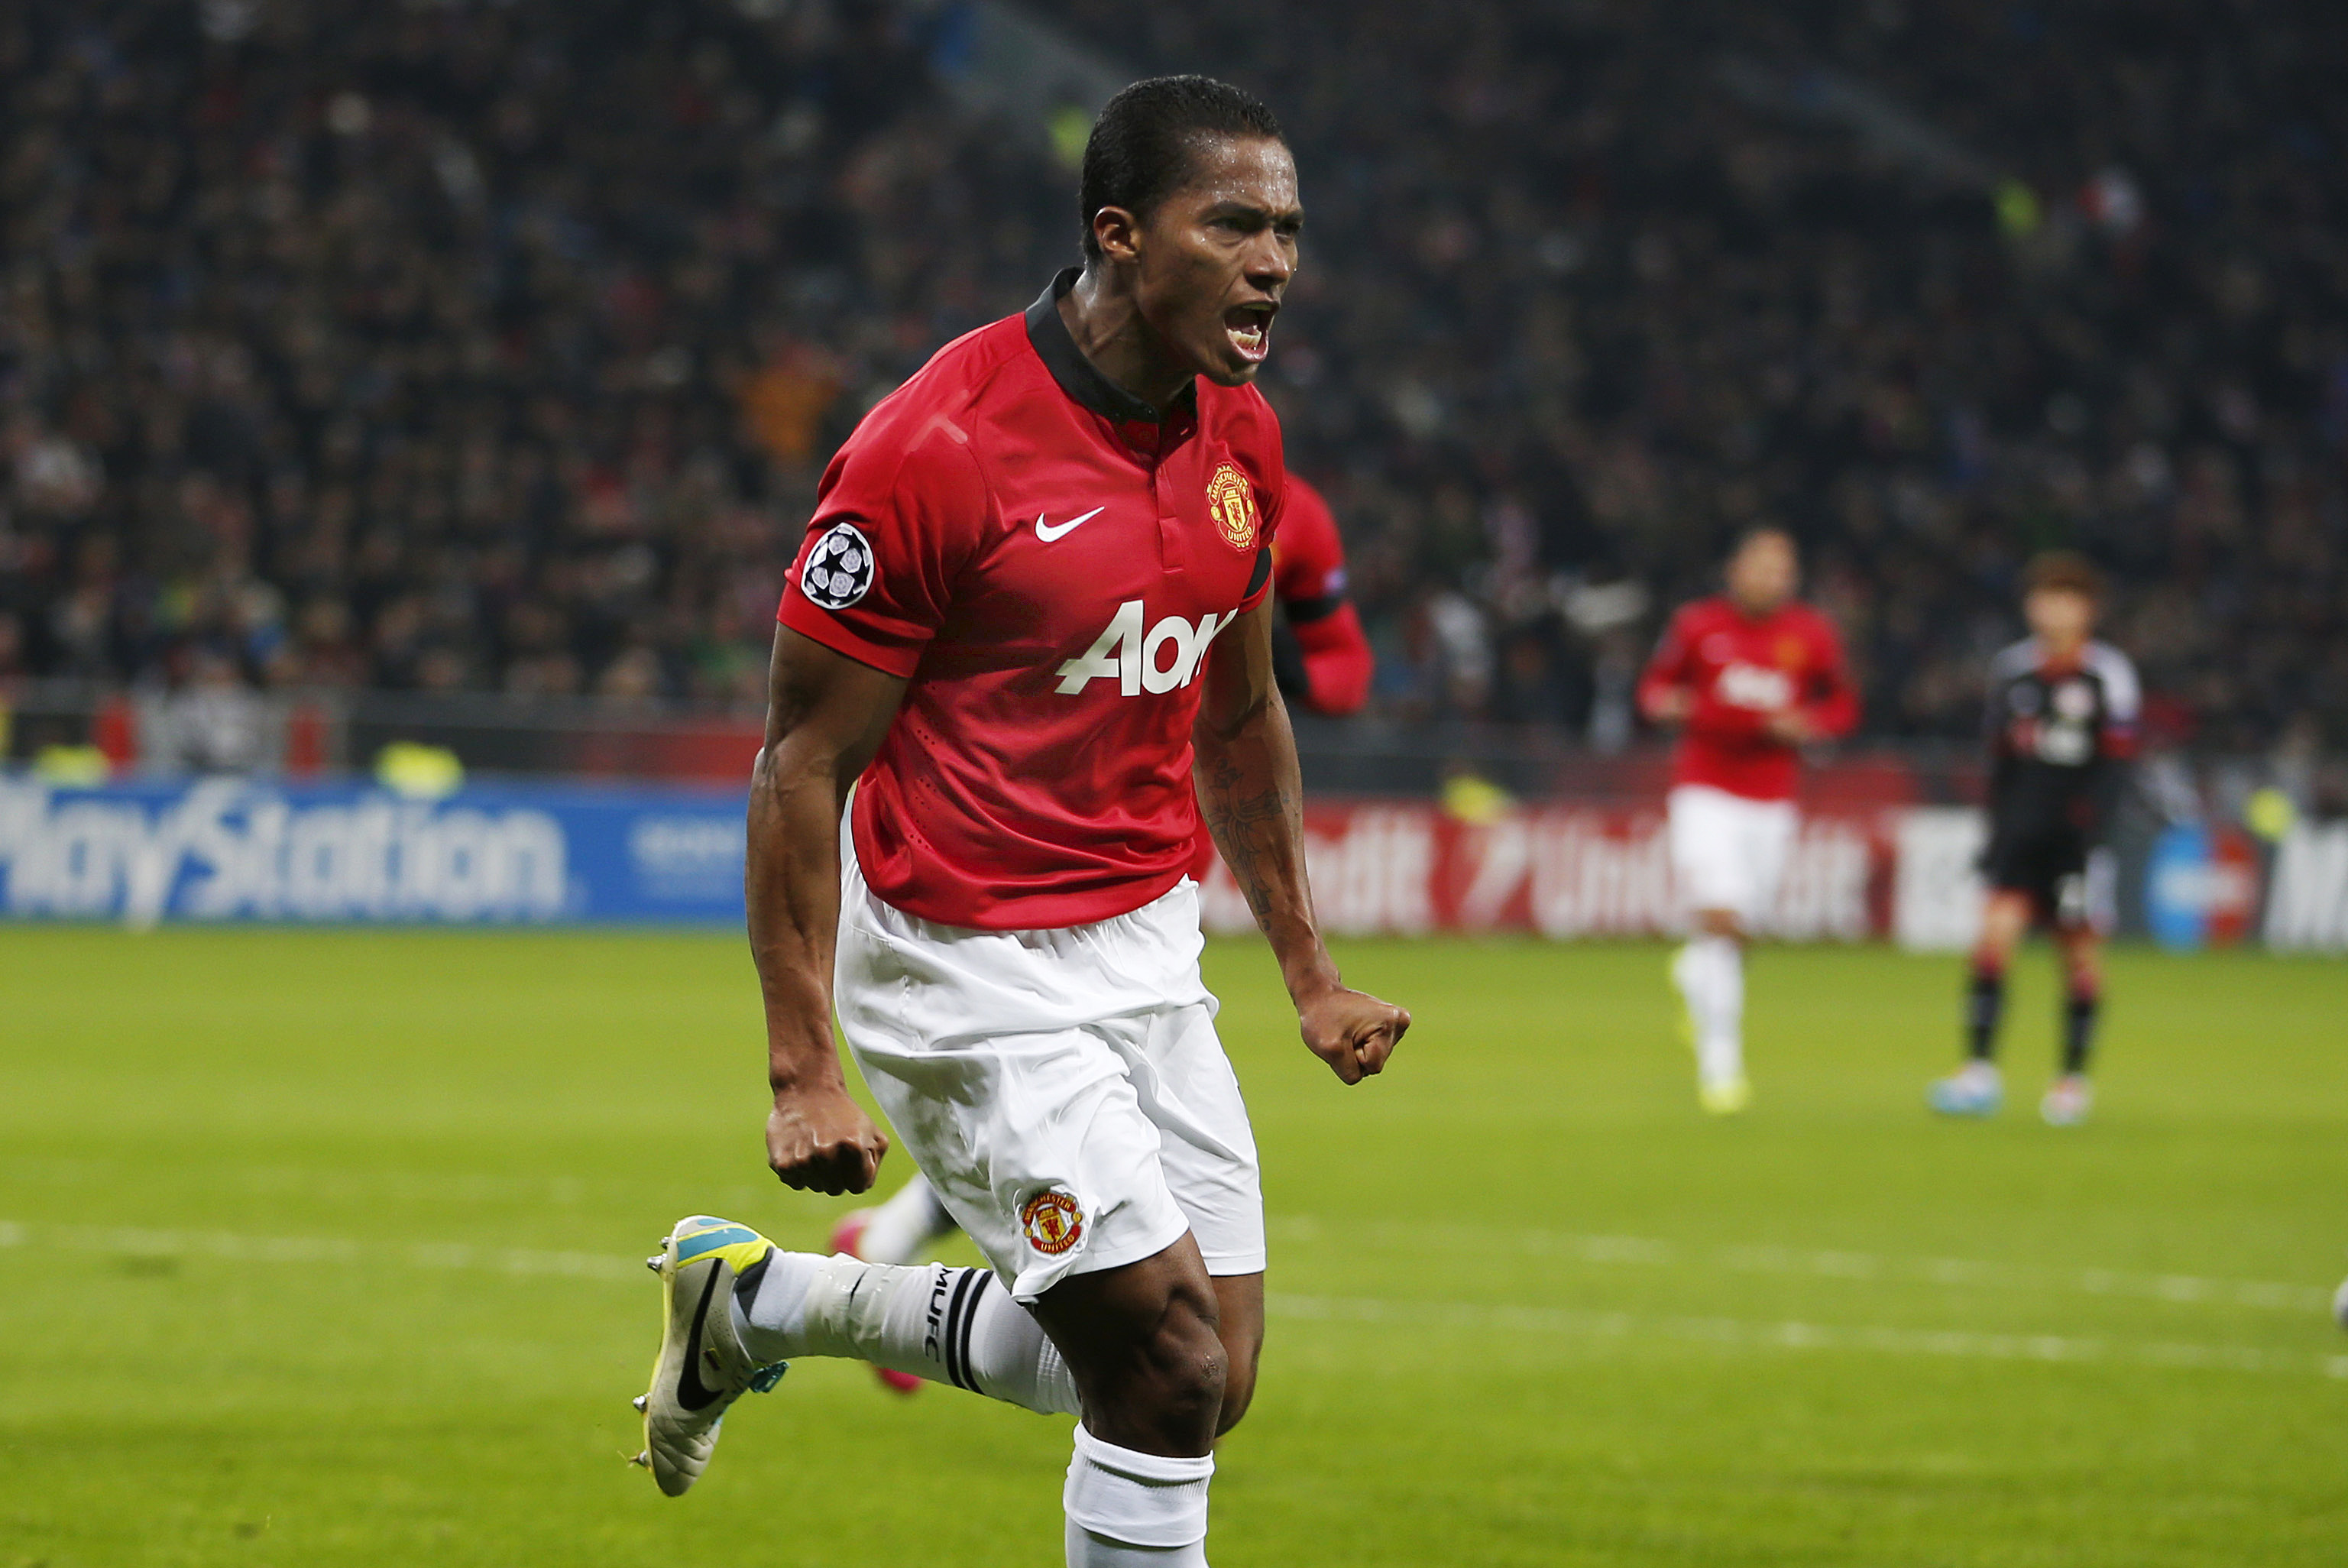 Why Manchester United’s Antonio Valencia will give Tottenham Hotspur a torrid time